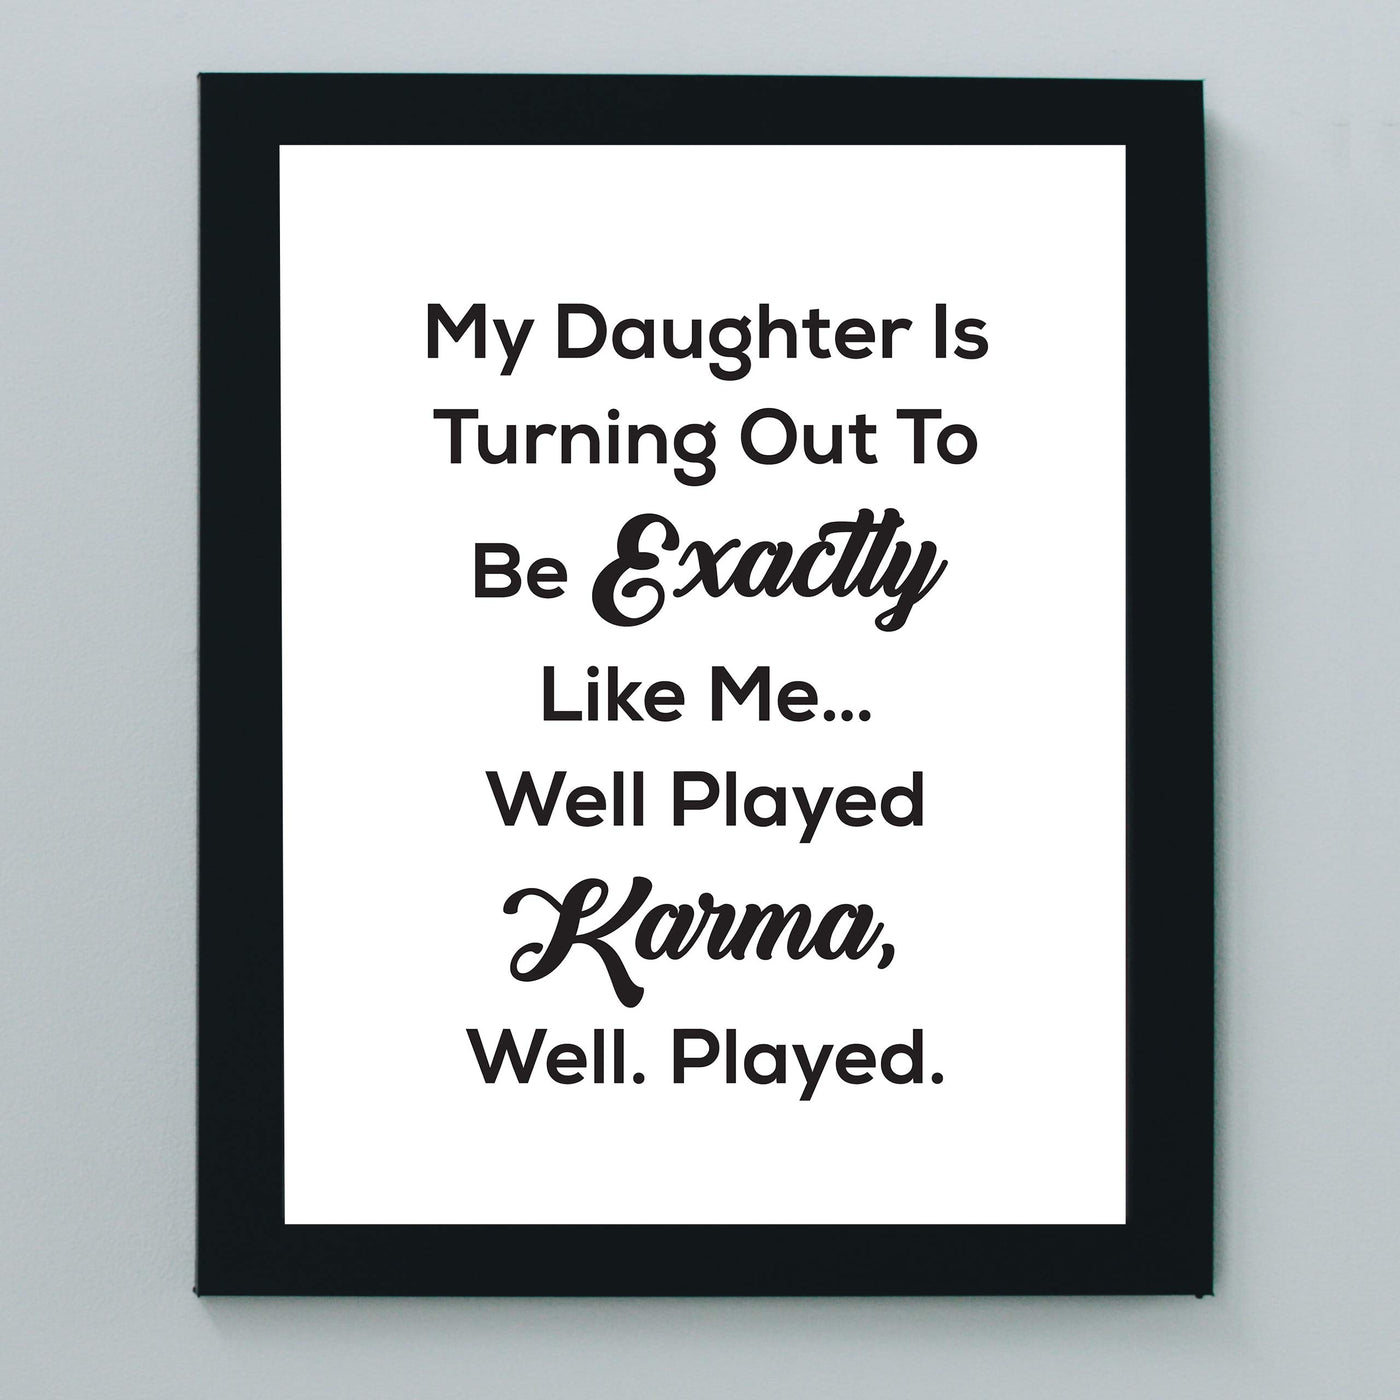 My Daughter Turning Out Like Me-Well Played Karma Funny Wall Art Sign -8 x 10" Sarcastic Poster Print-Ready to Frame. Humorous Decor for Home-Office-Studio-She Shed-Cave. Fun Novelty Gift!